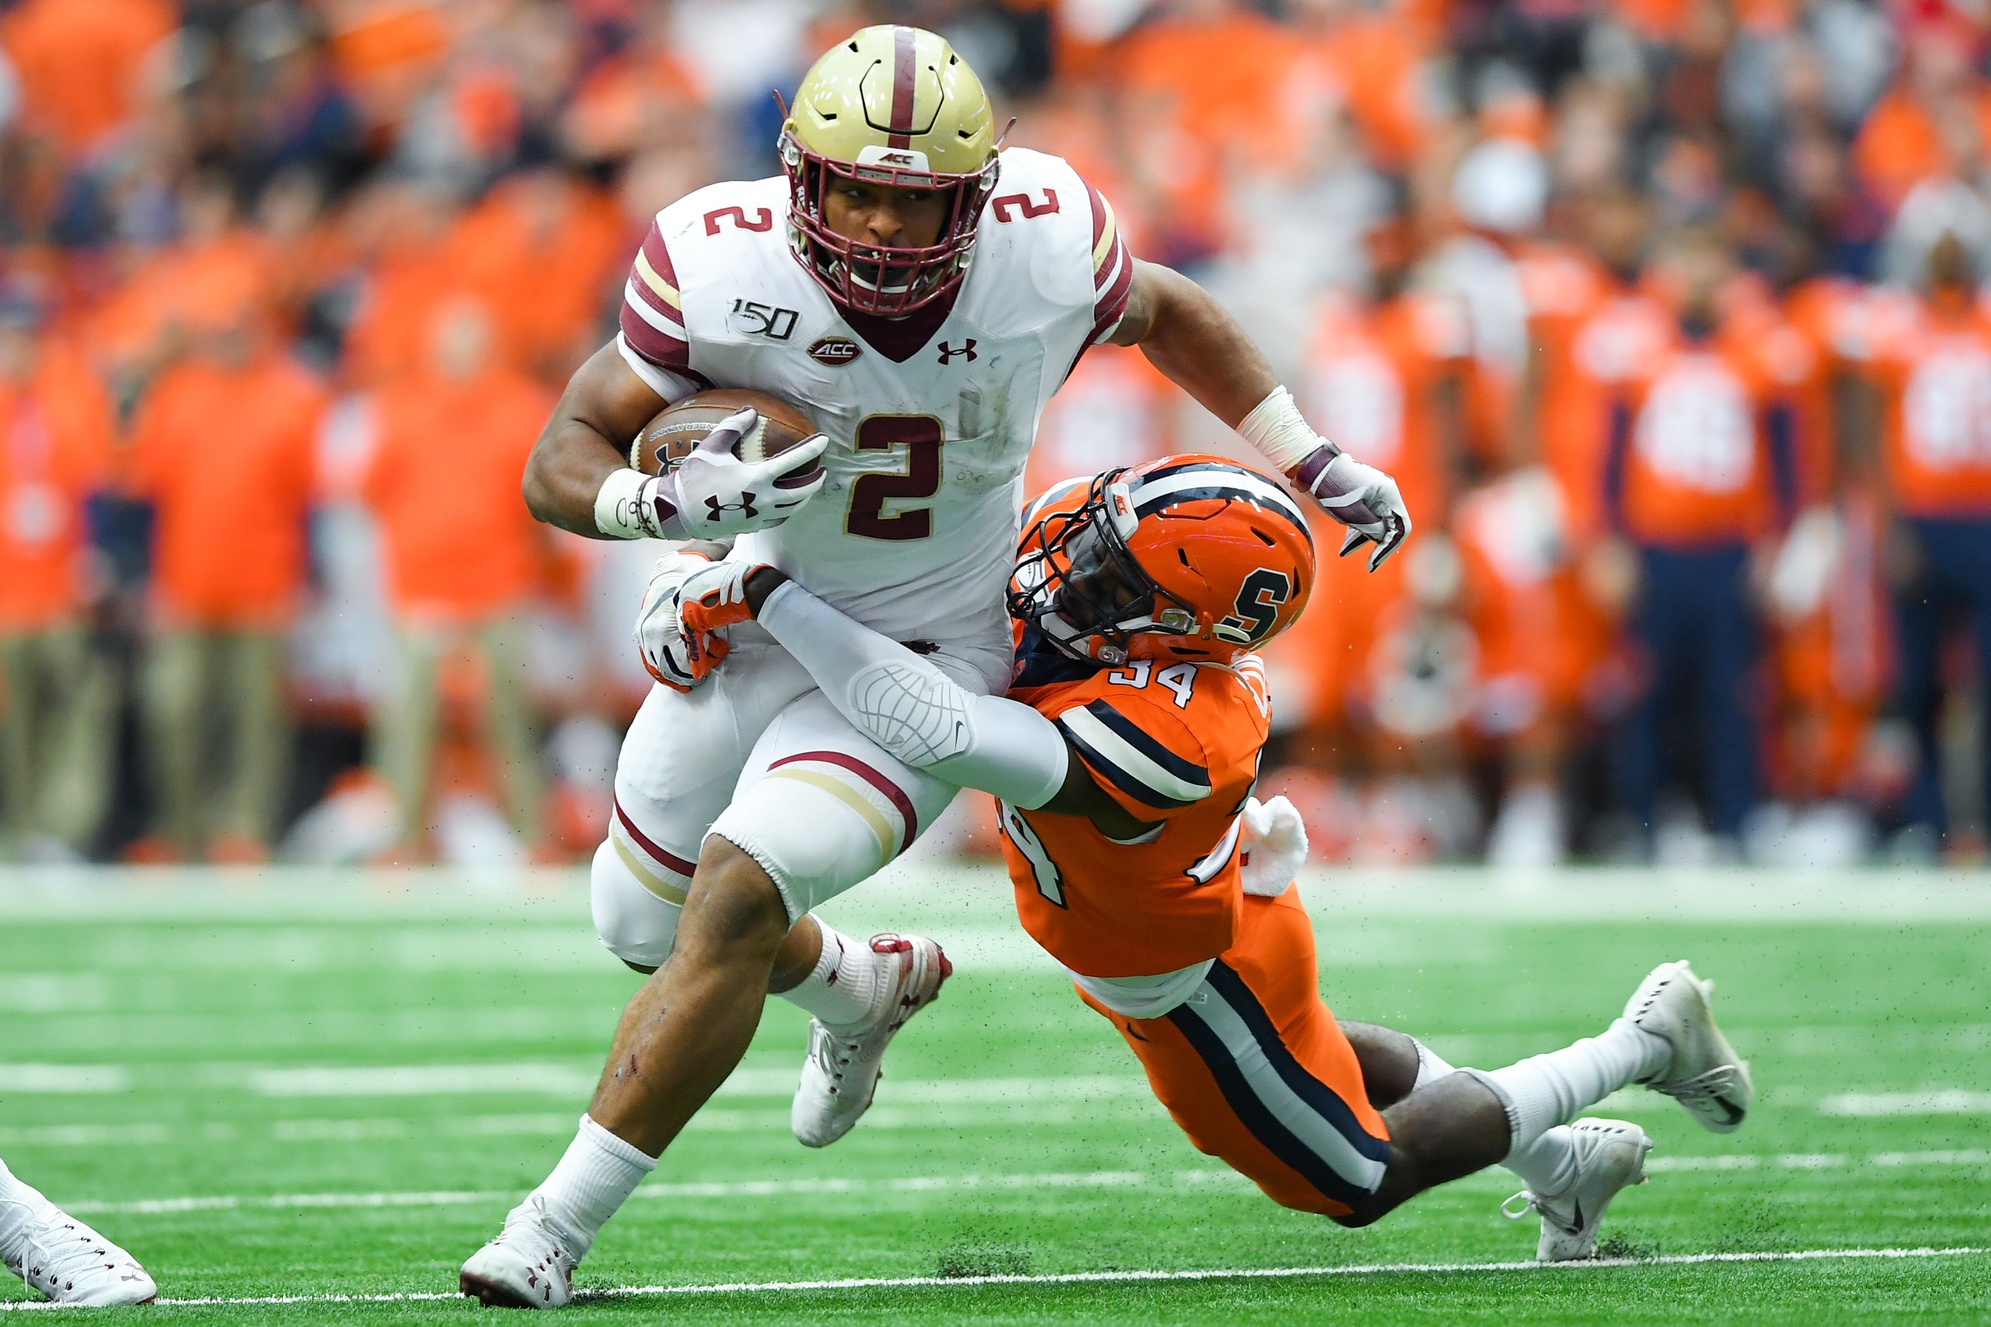 The Green Bay Packers selected BC running back AJ Dillon in the